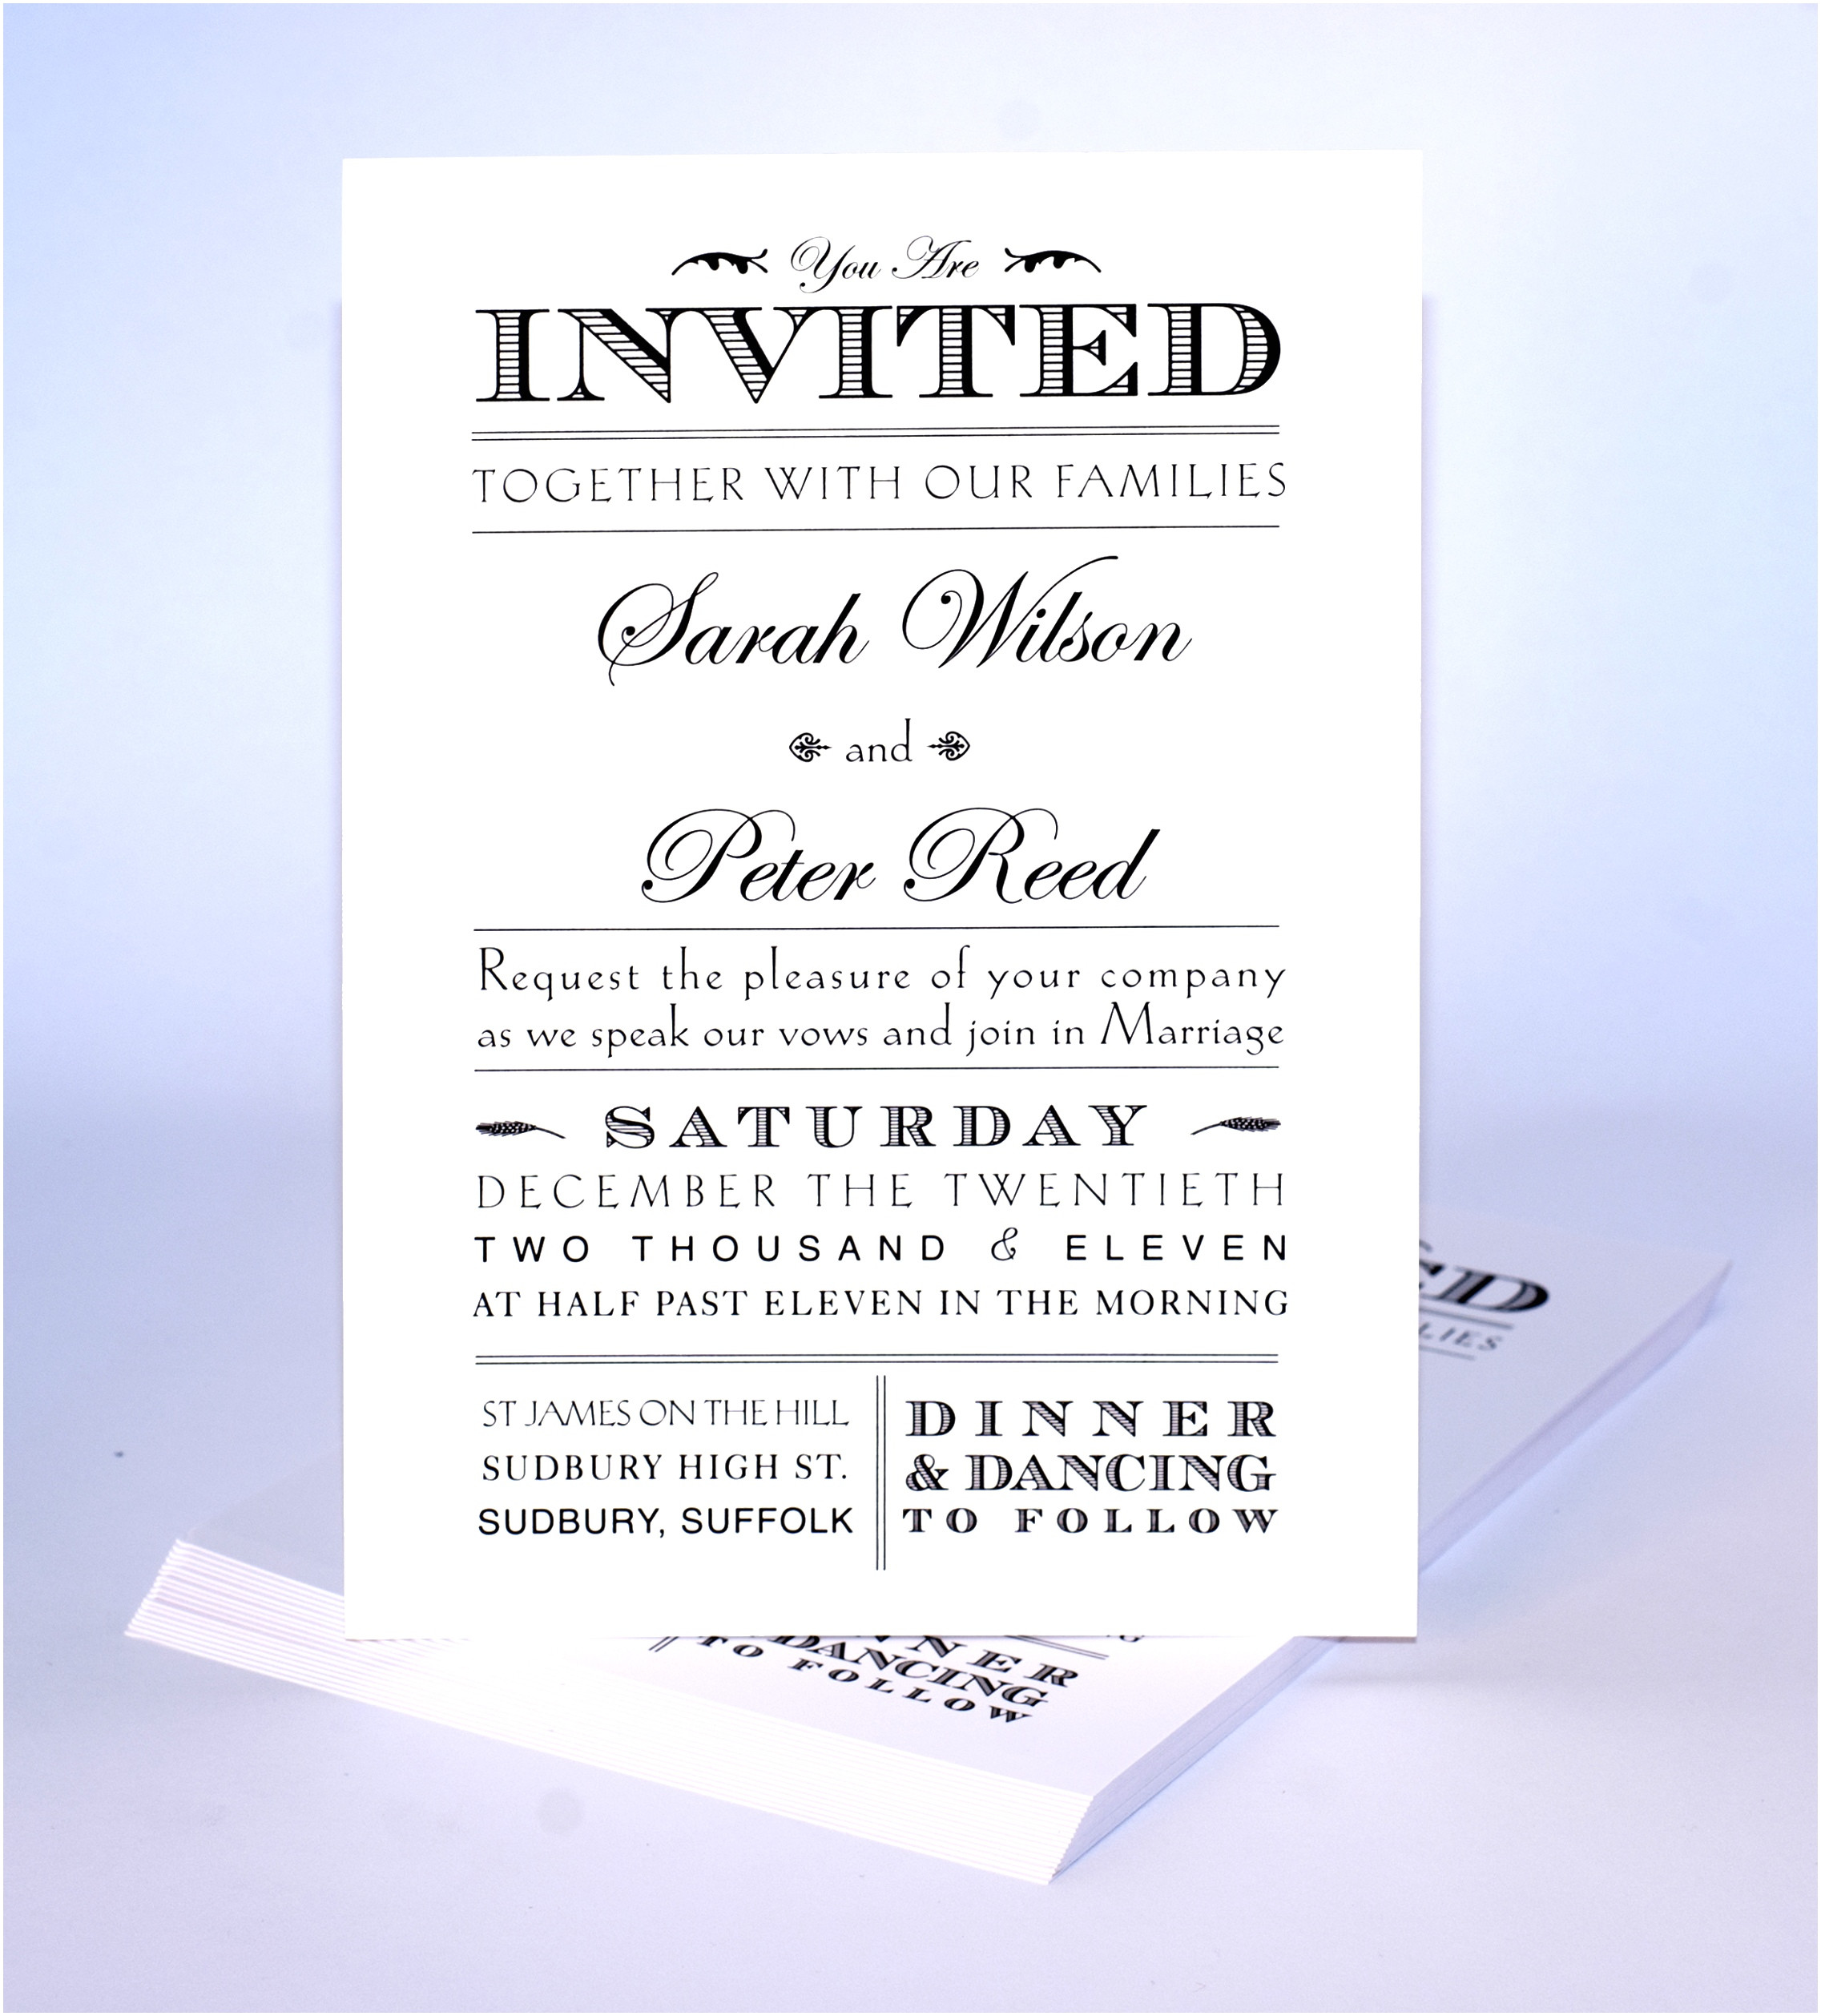 calligraphy services hand lettering wedding invites example wedding invite templates uk awesome pdf word excel download templates topir ritet